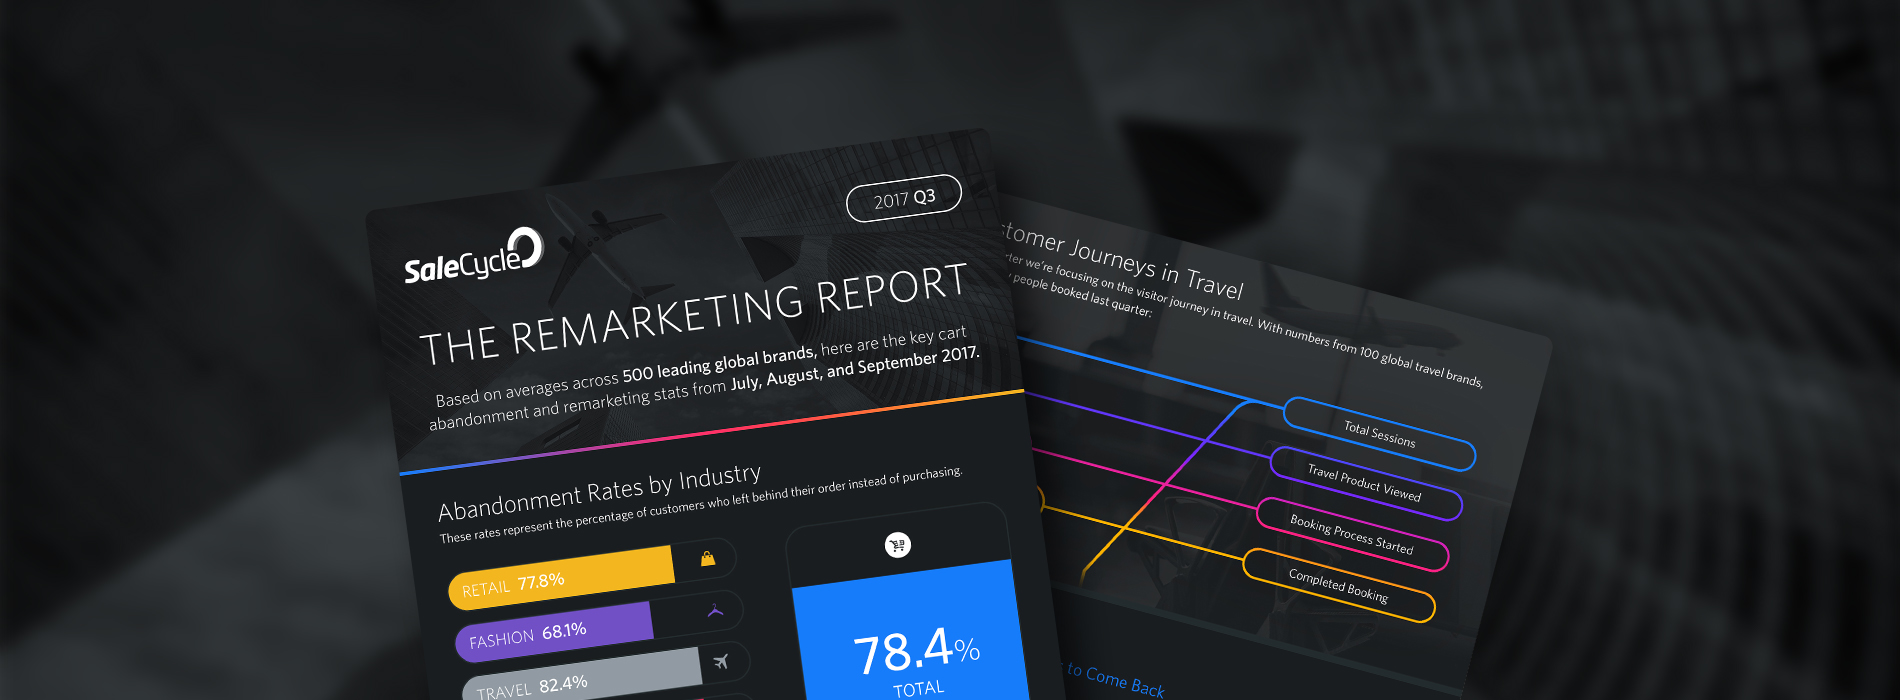 [Infographic] The Remarketing Report – Q3 2017